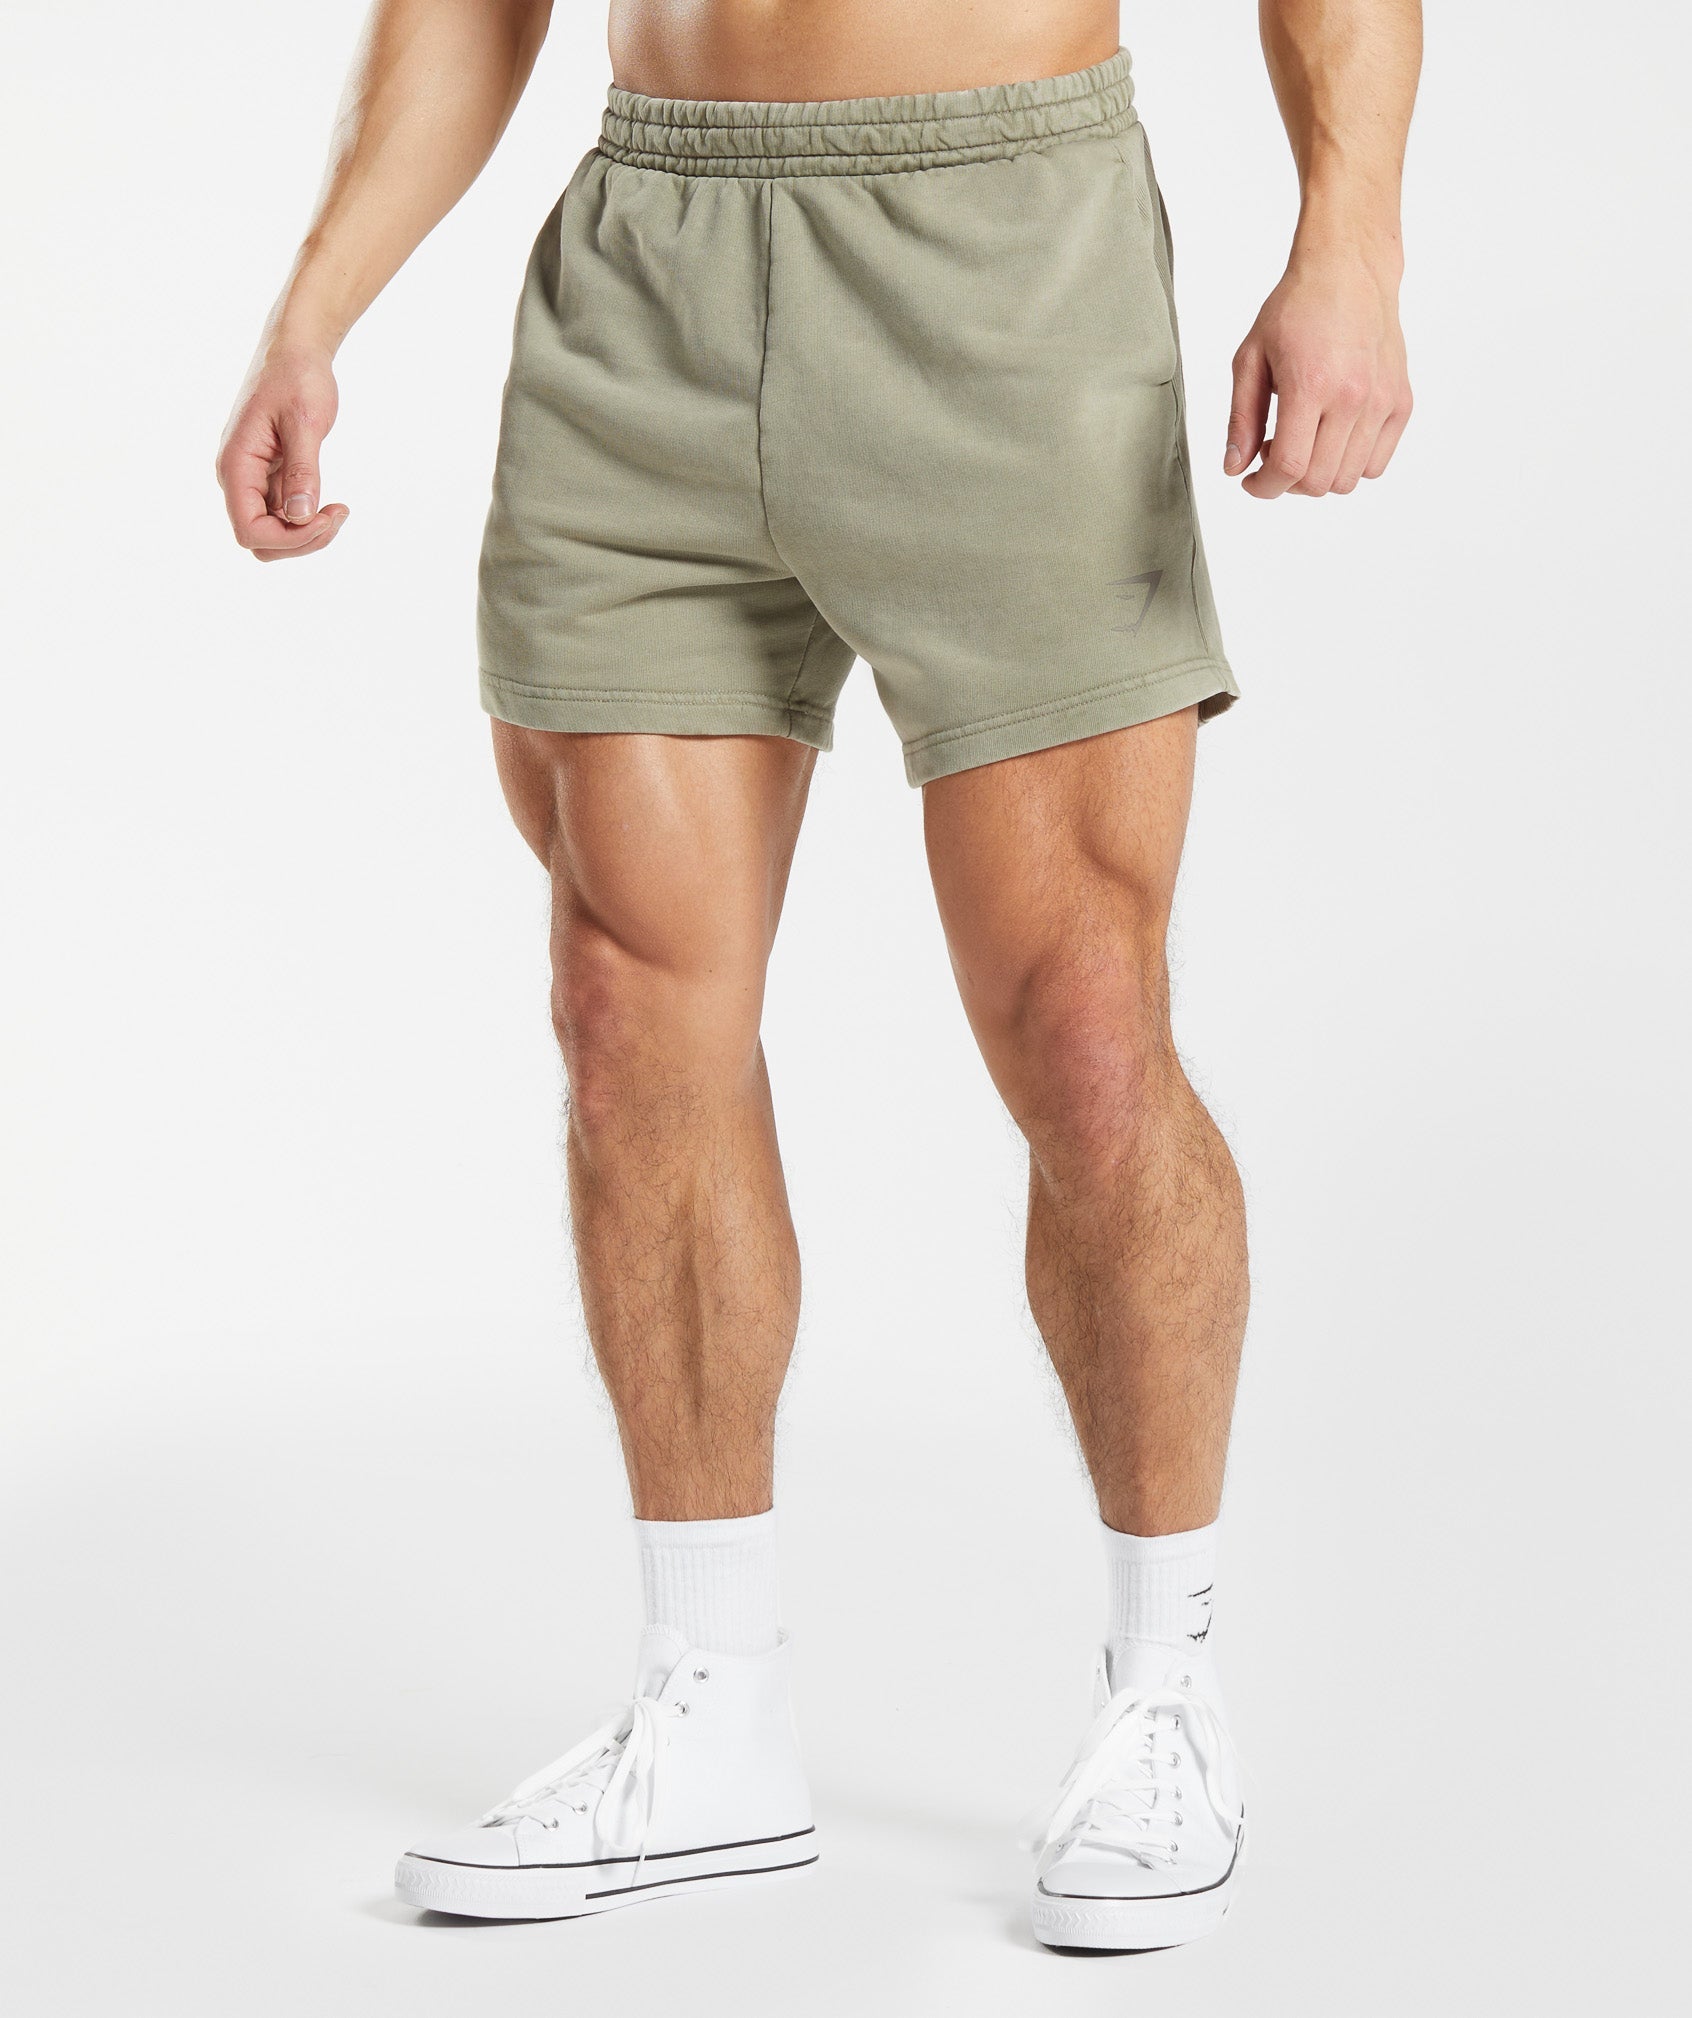 Men's Quick Dry Gym Shorts for Fitness and Training